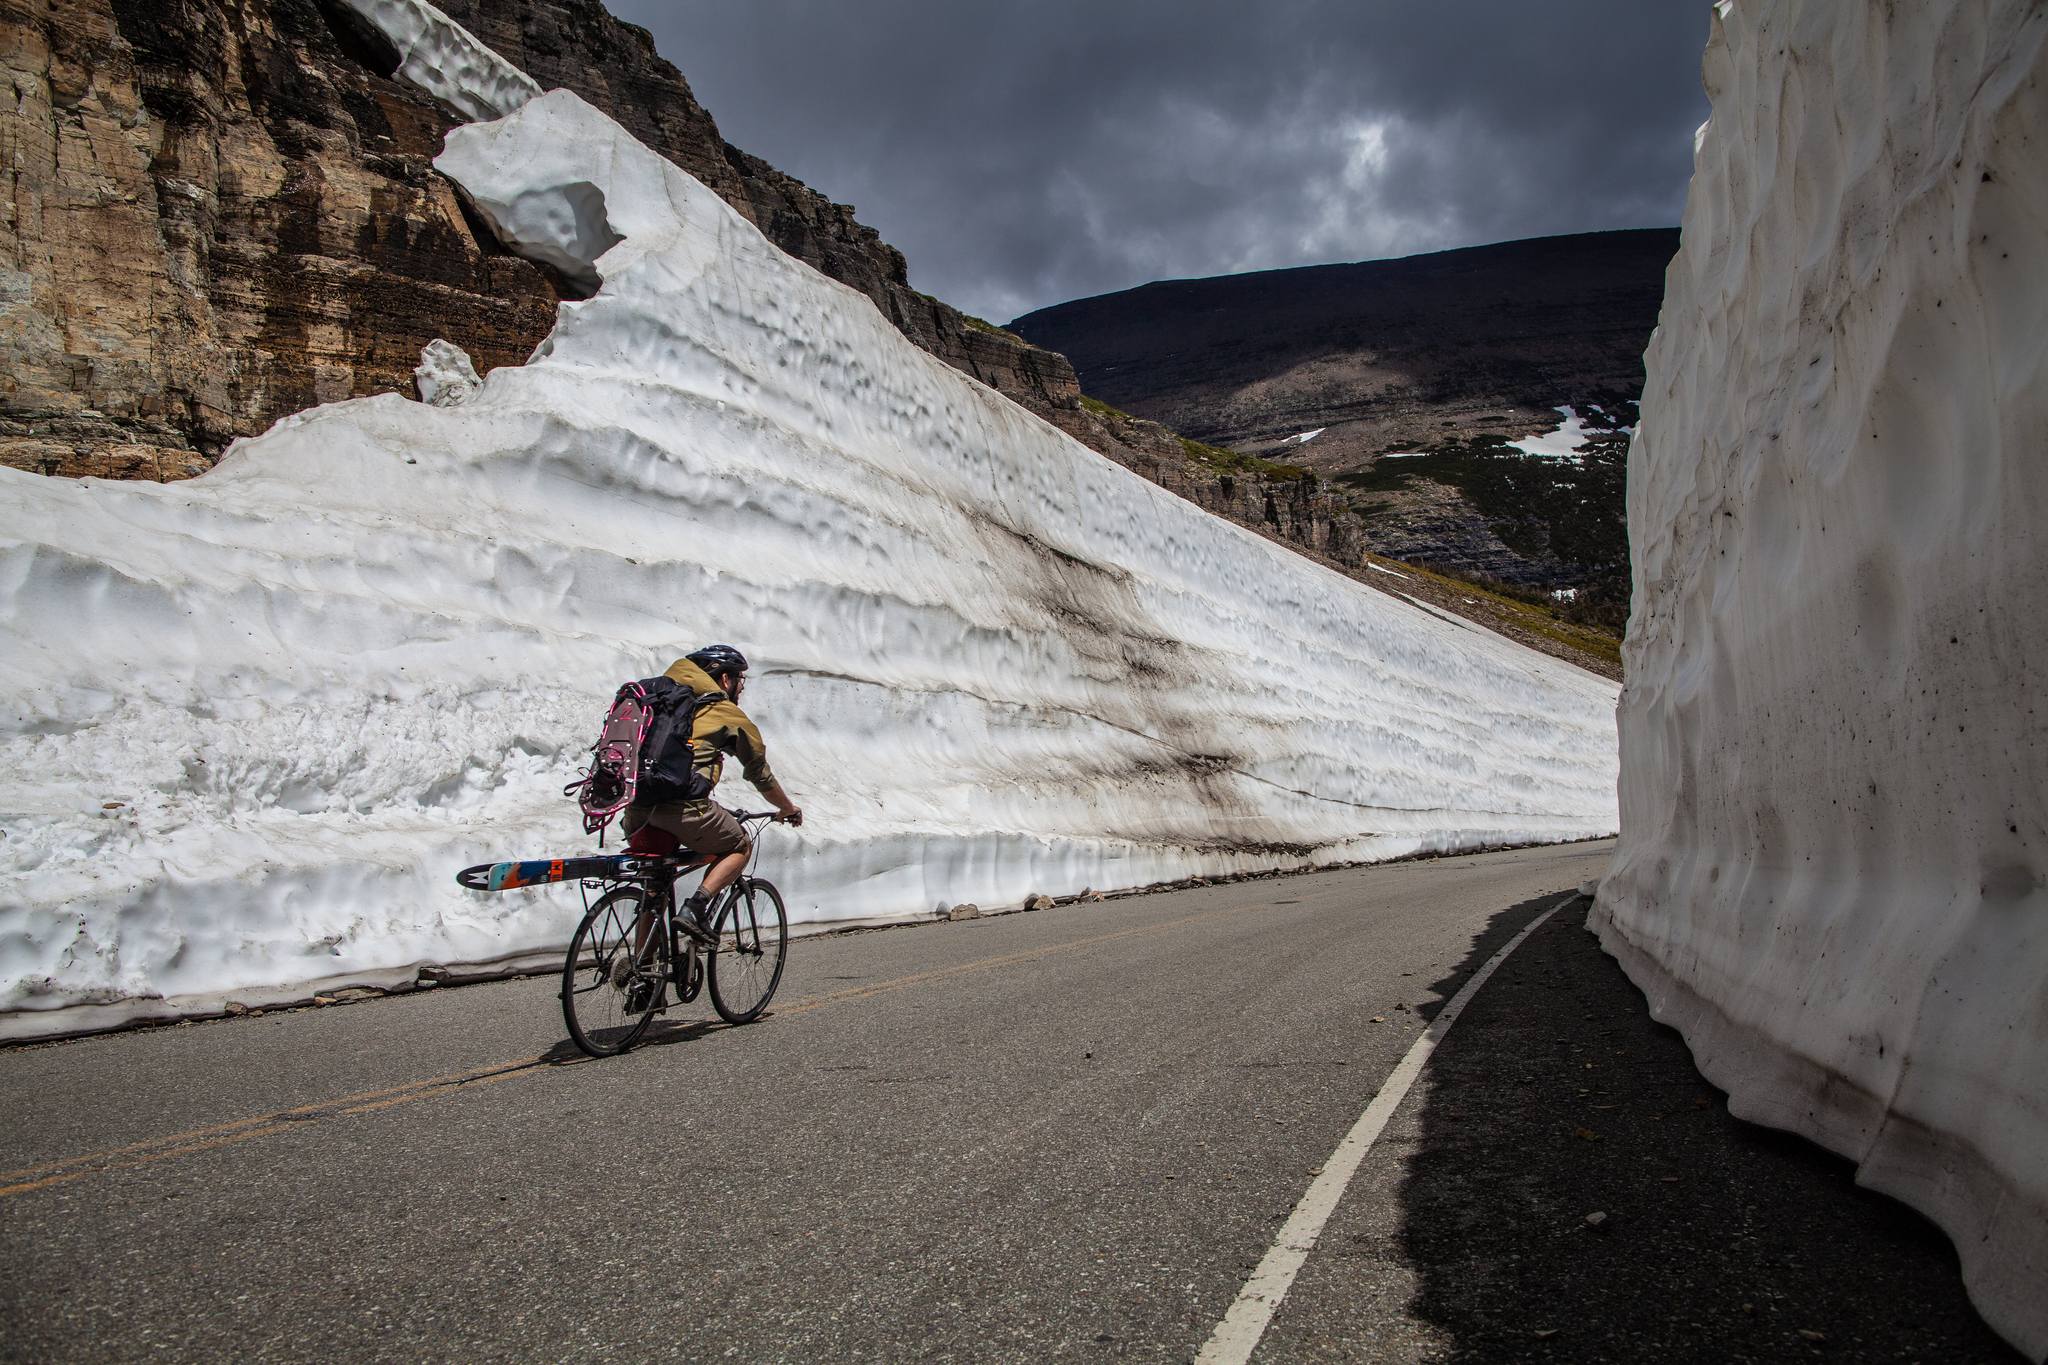 Going-to-the-sun road in glacier national park is now open to cyclists